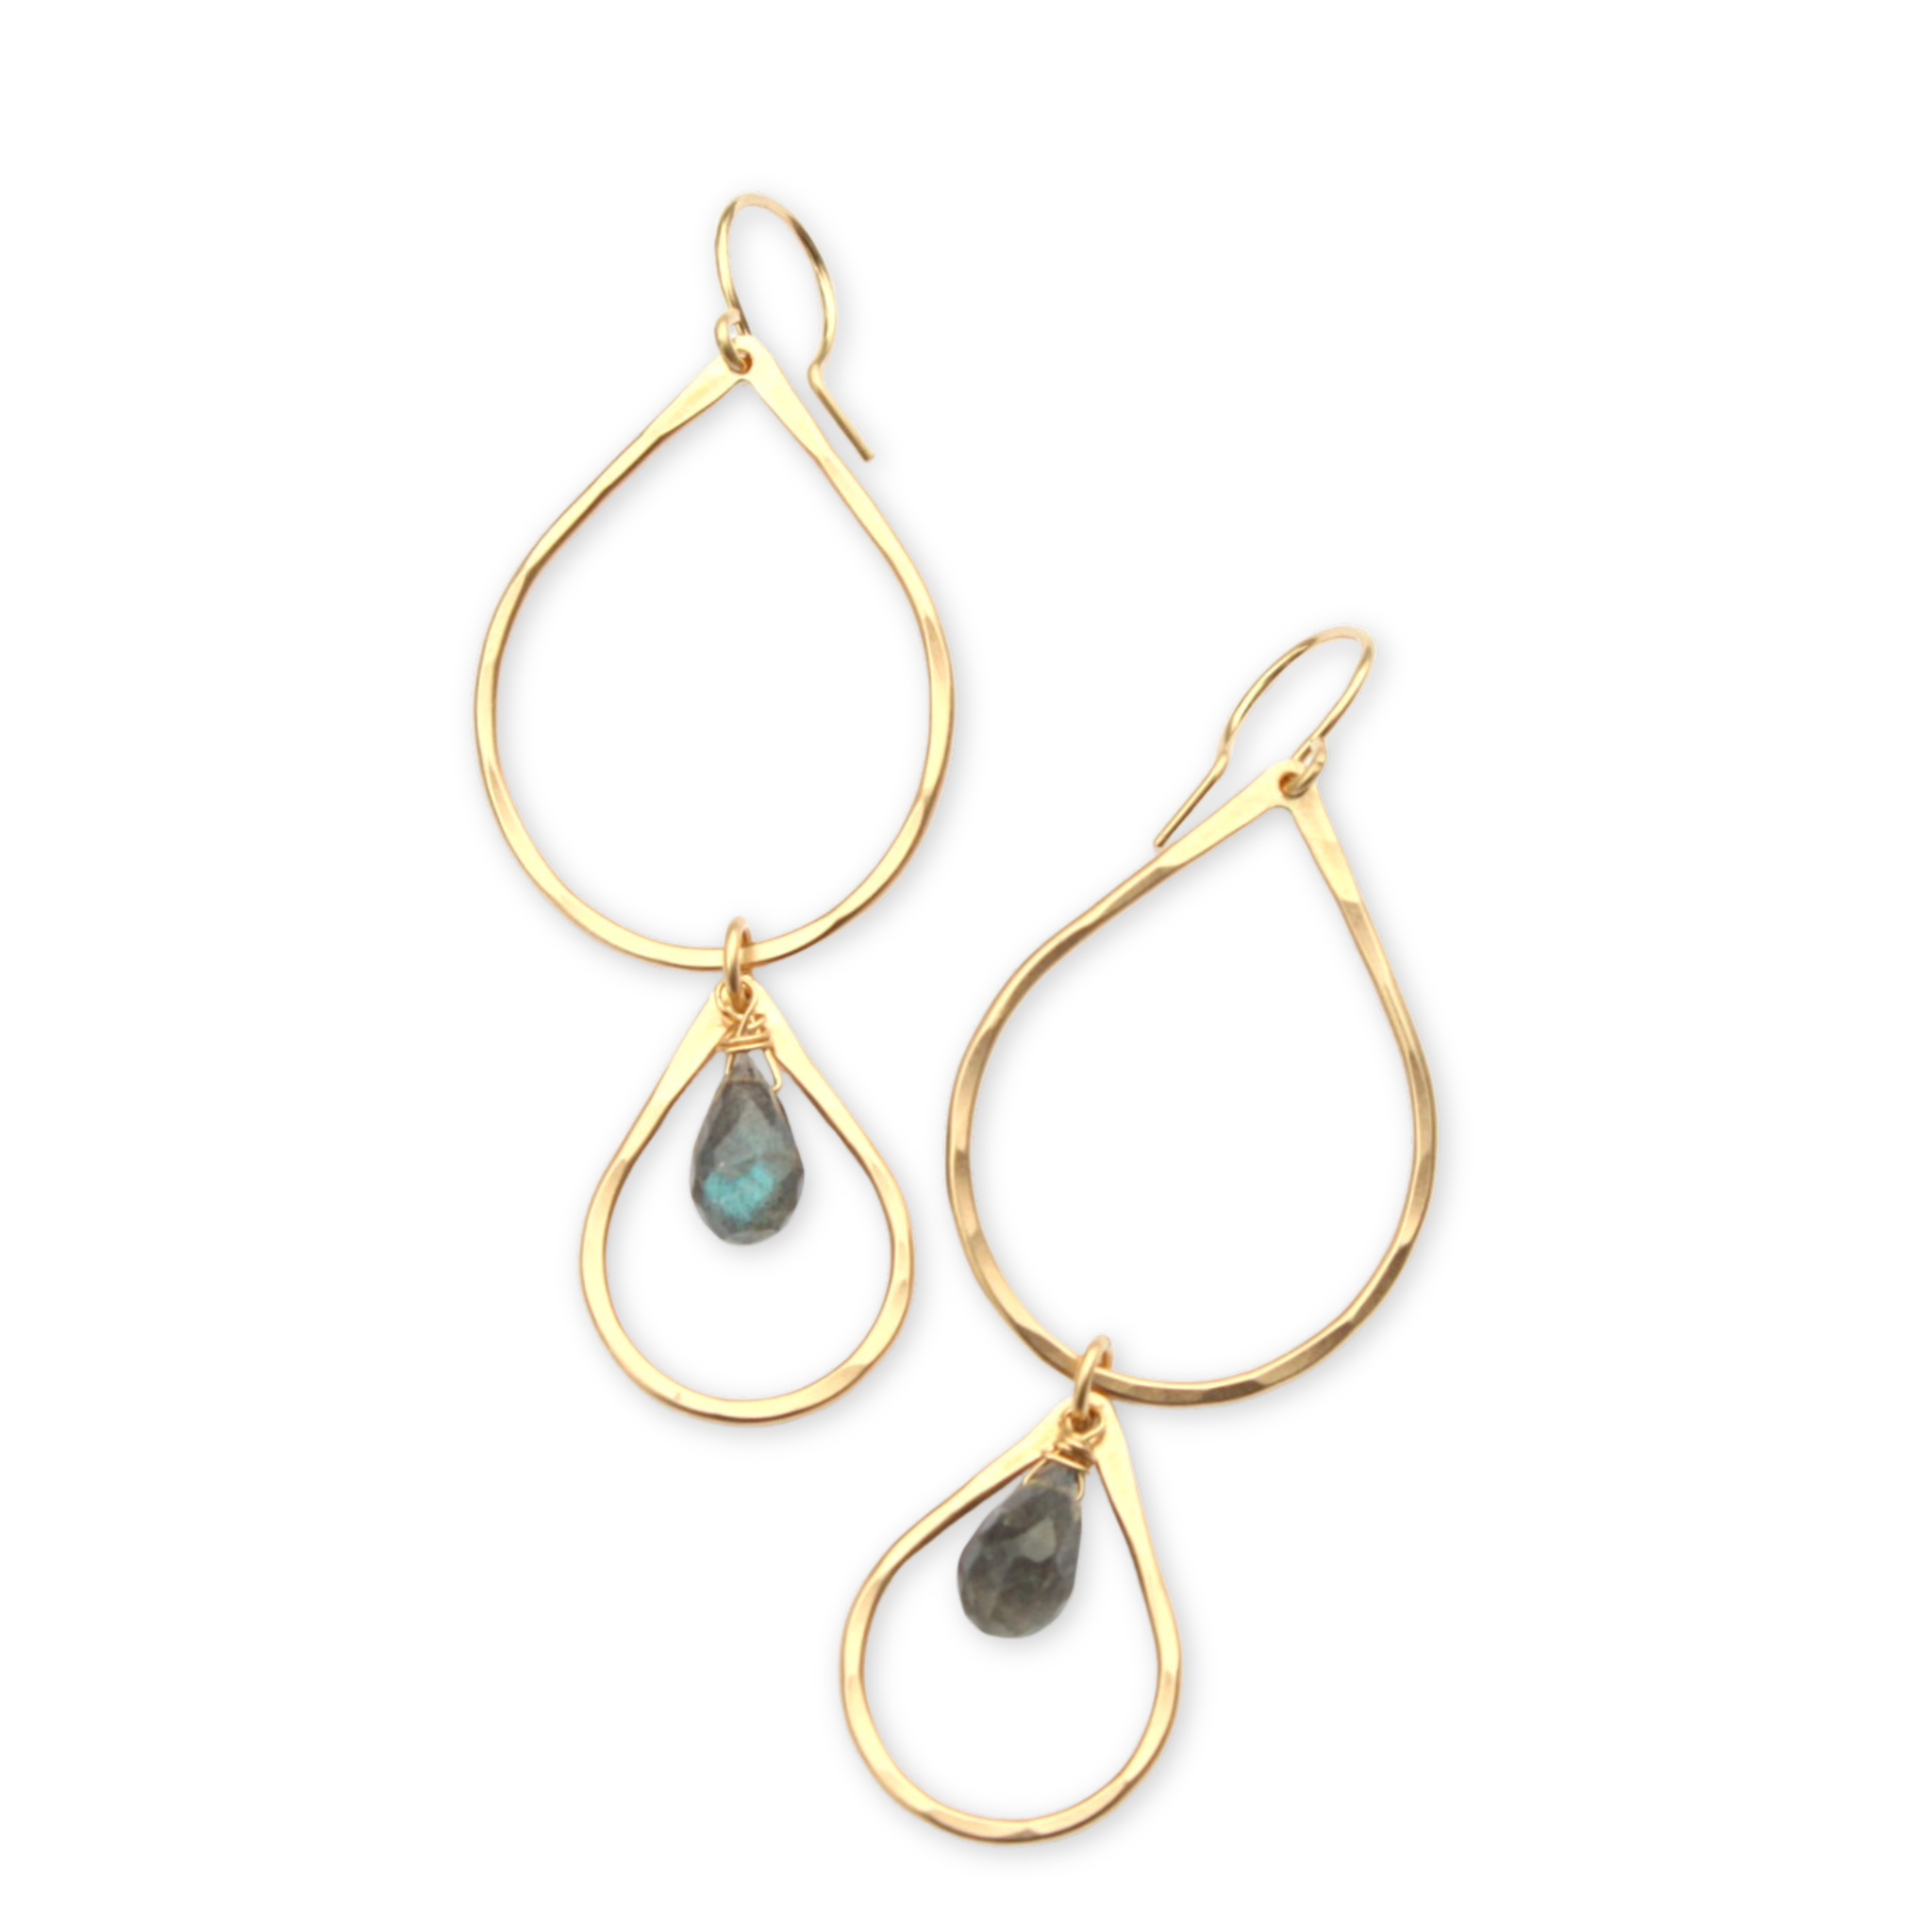 two hammered tear drop shaped pendants with labradorite stones hanging from ear wire